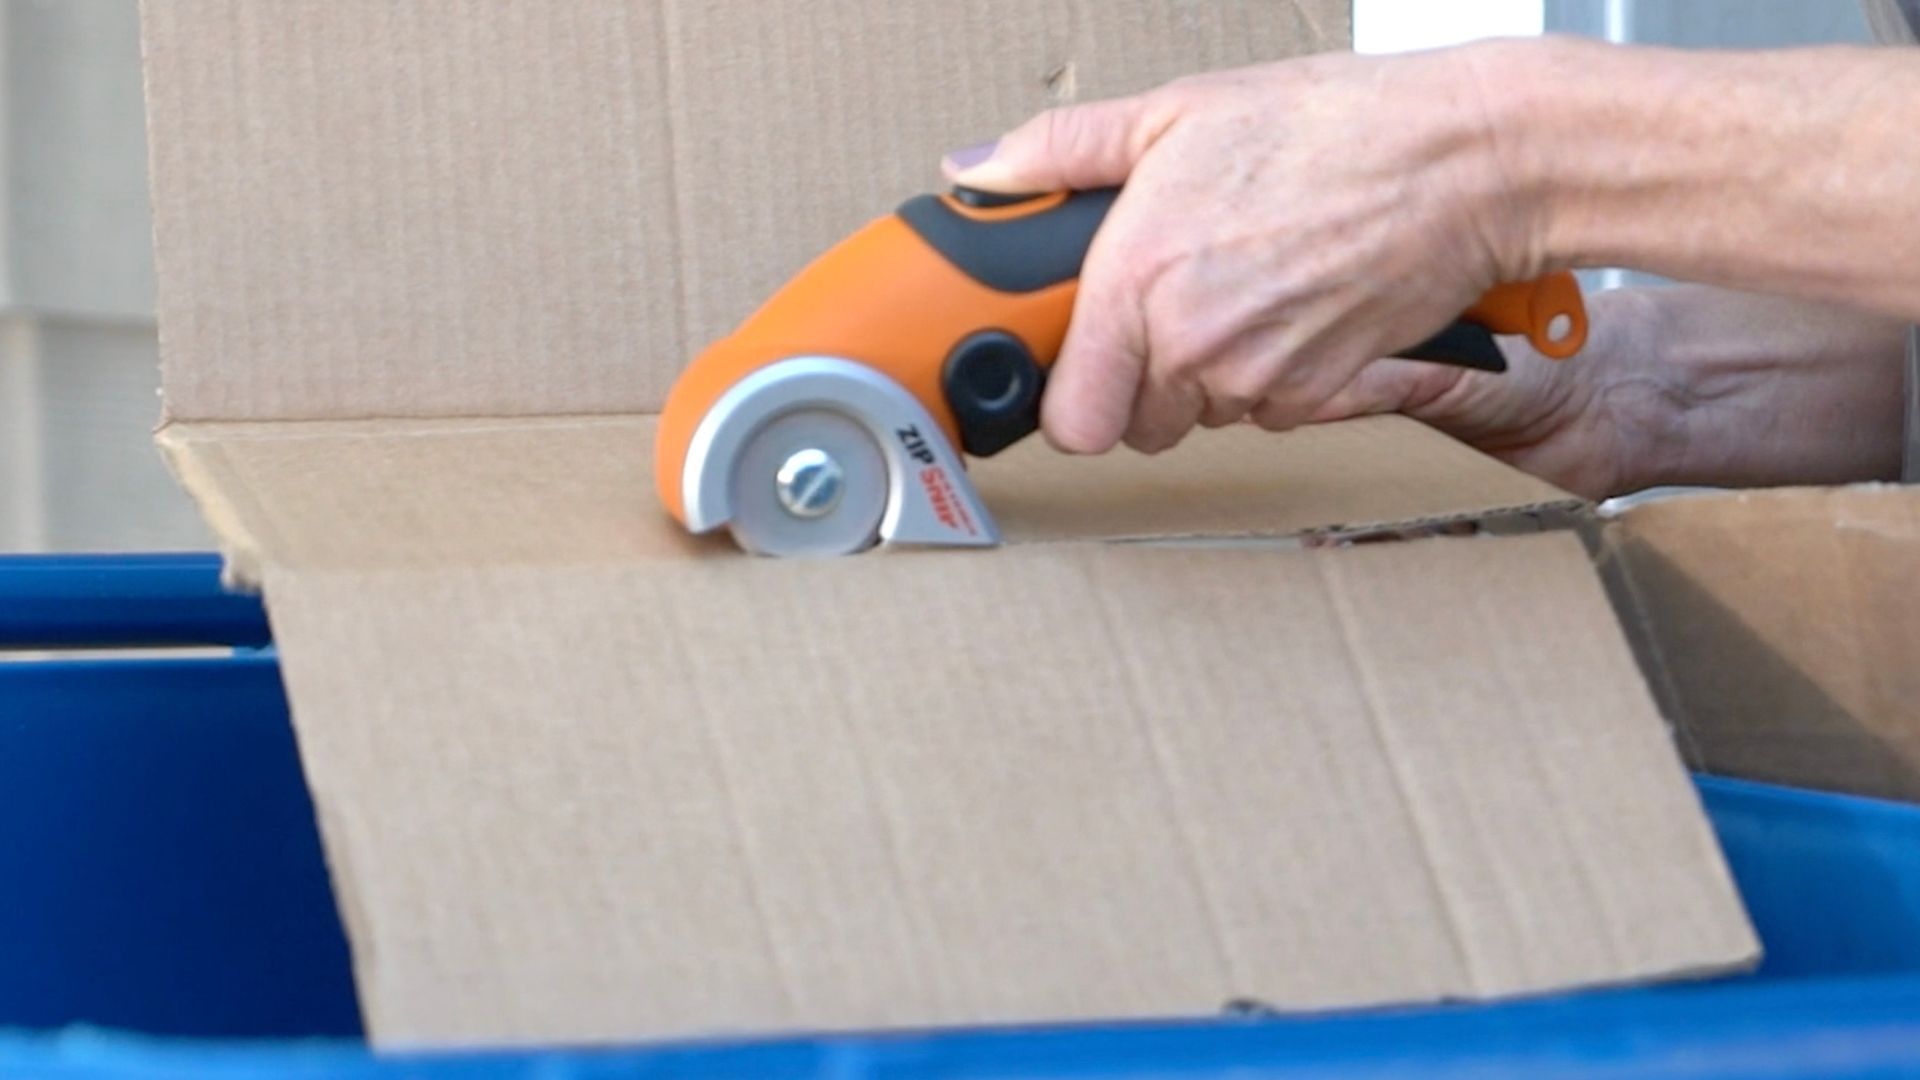 WORX rotary tool cutting boxes